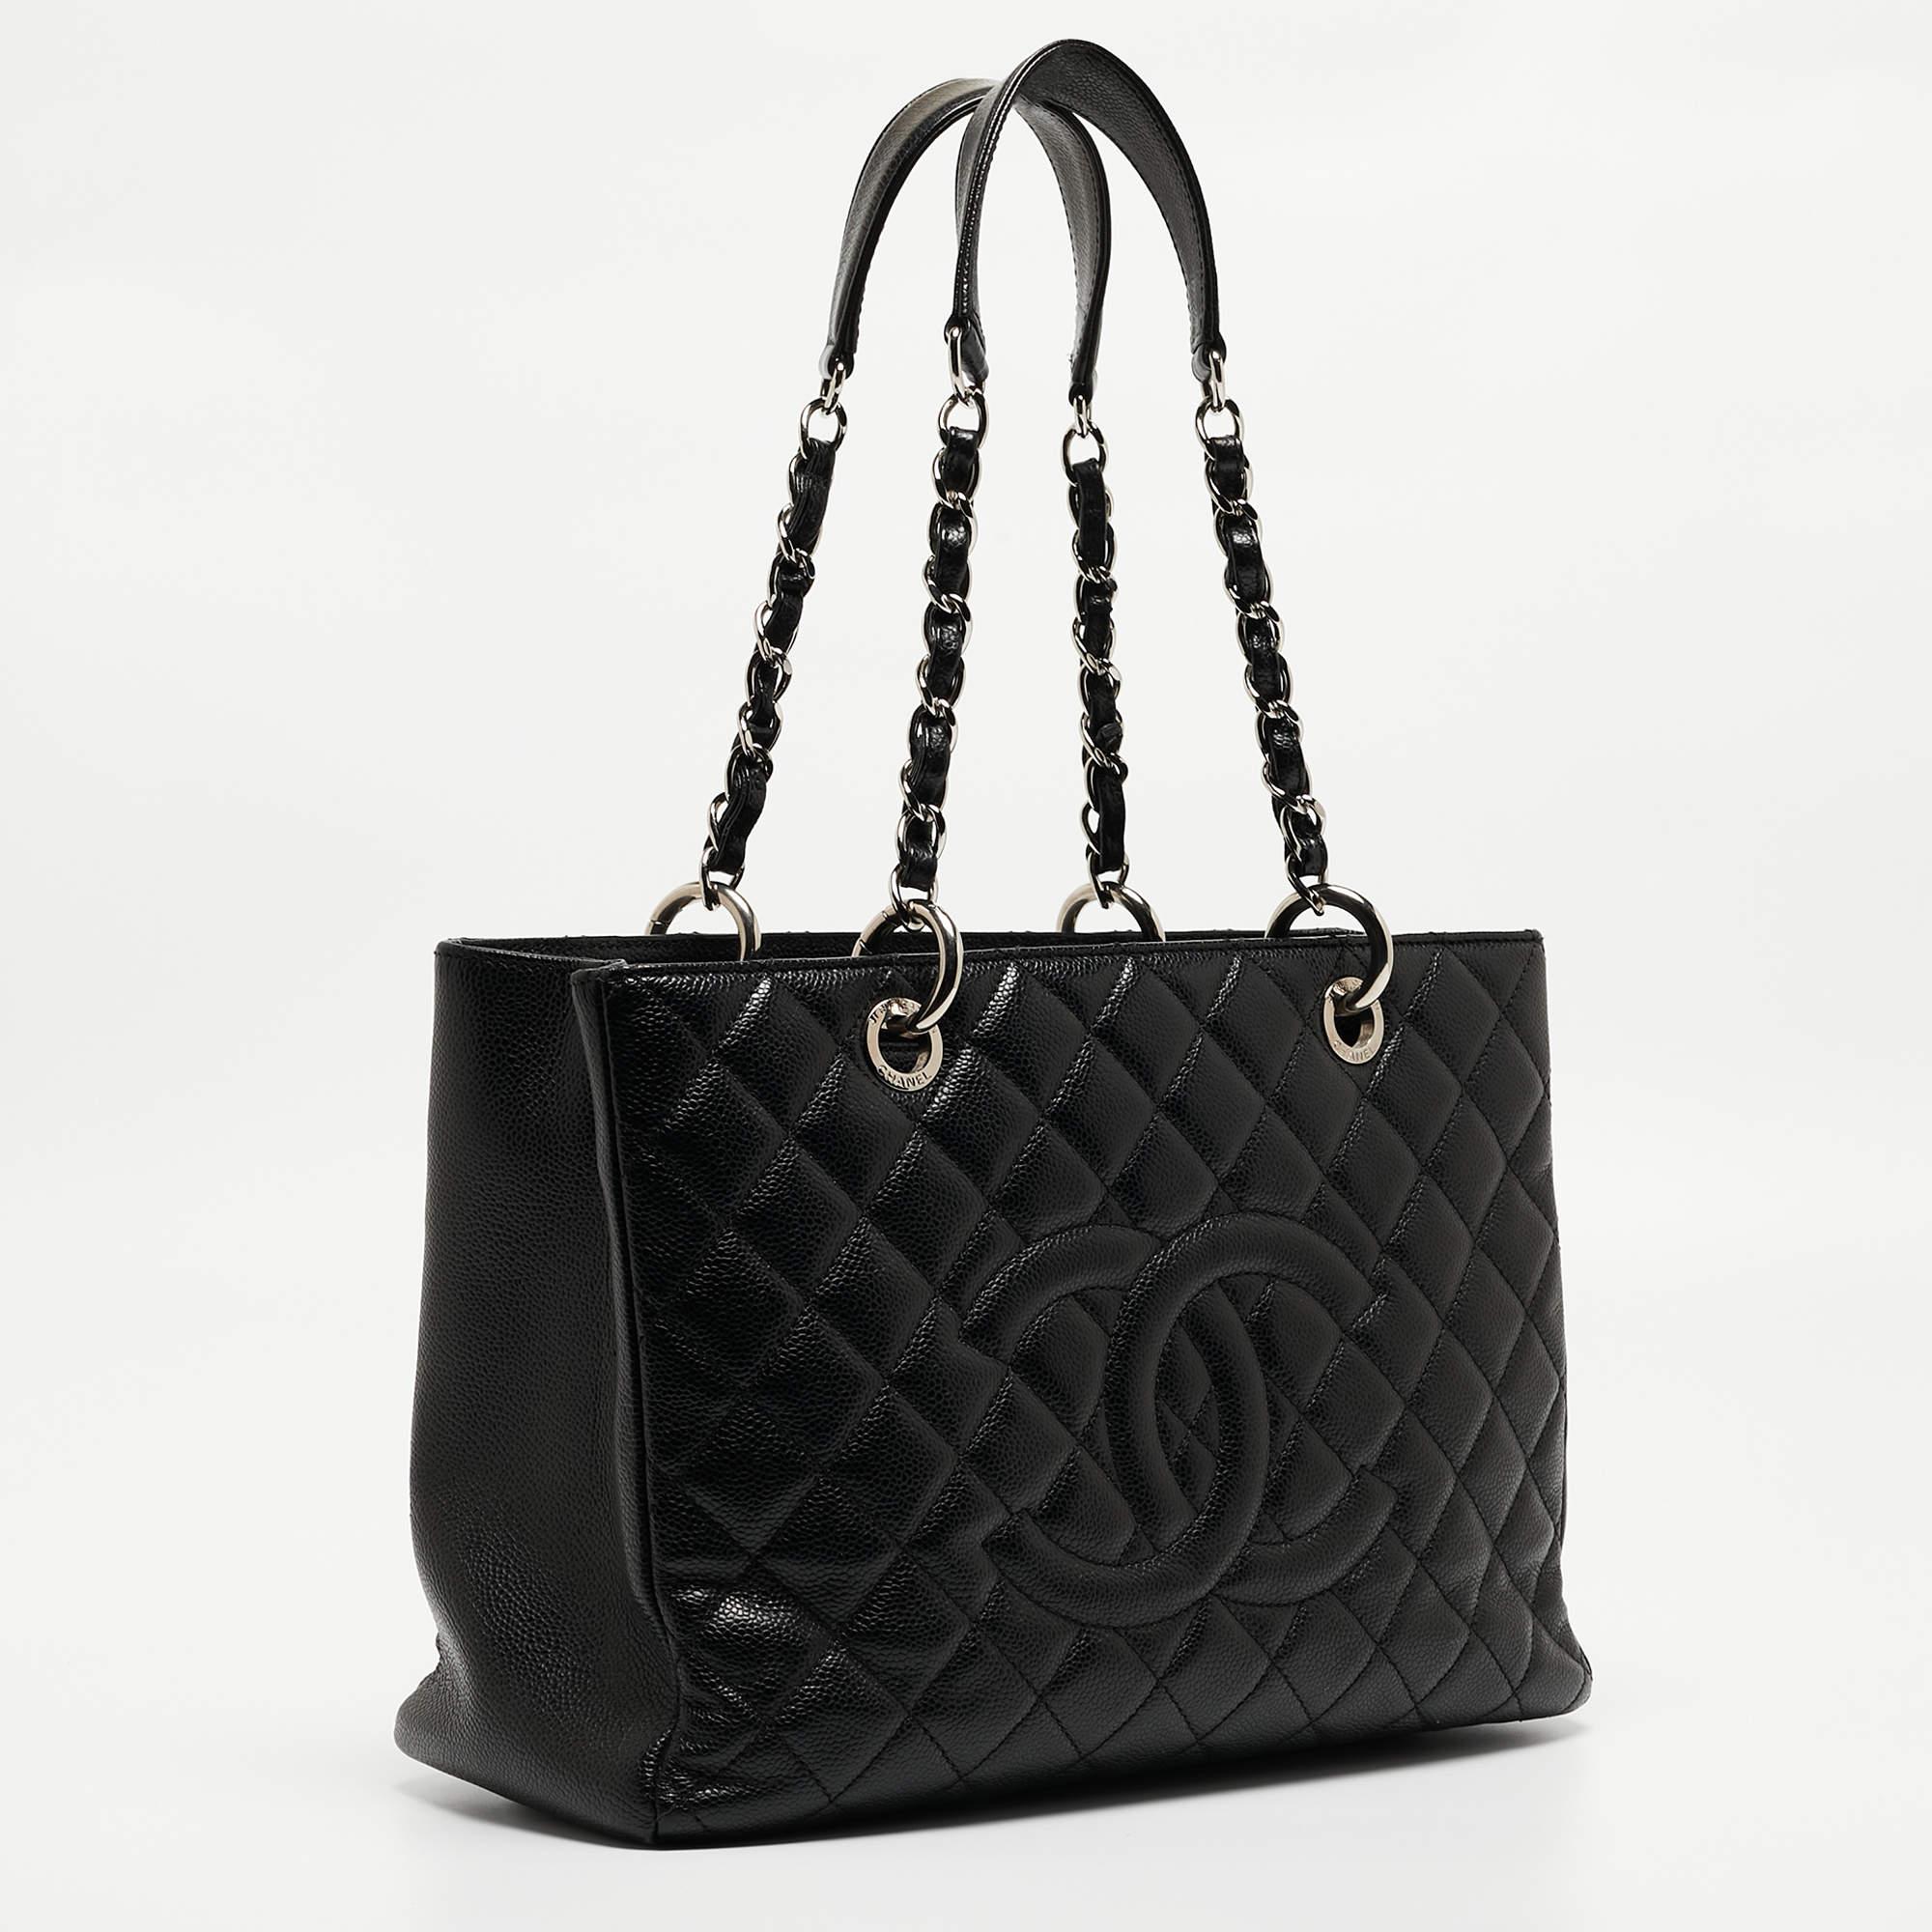 Chanel Black Quilted Caviar Leather Grand Shopper Tote 4